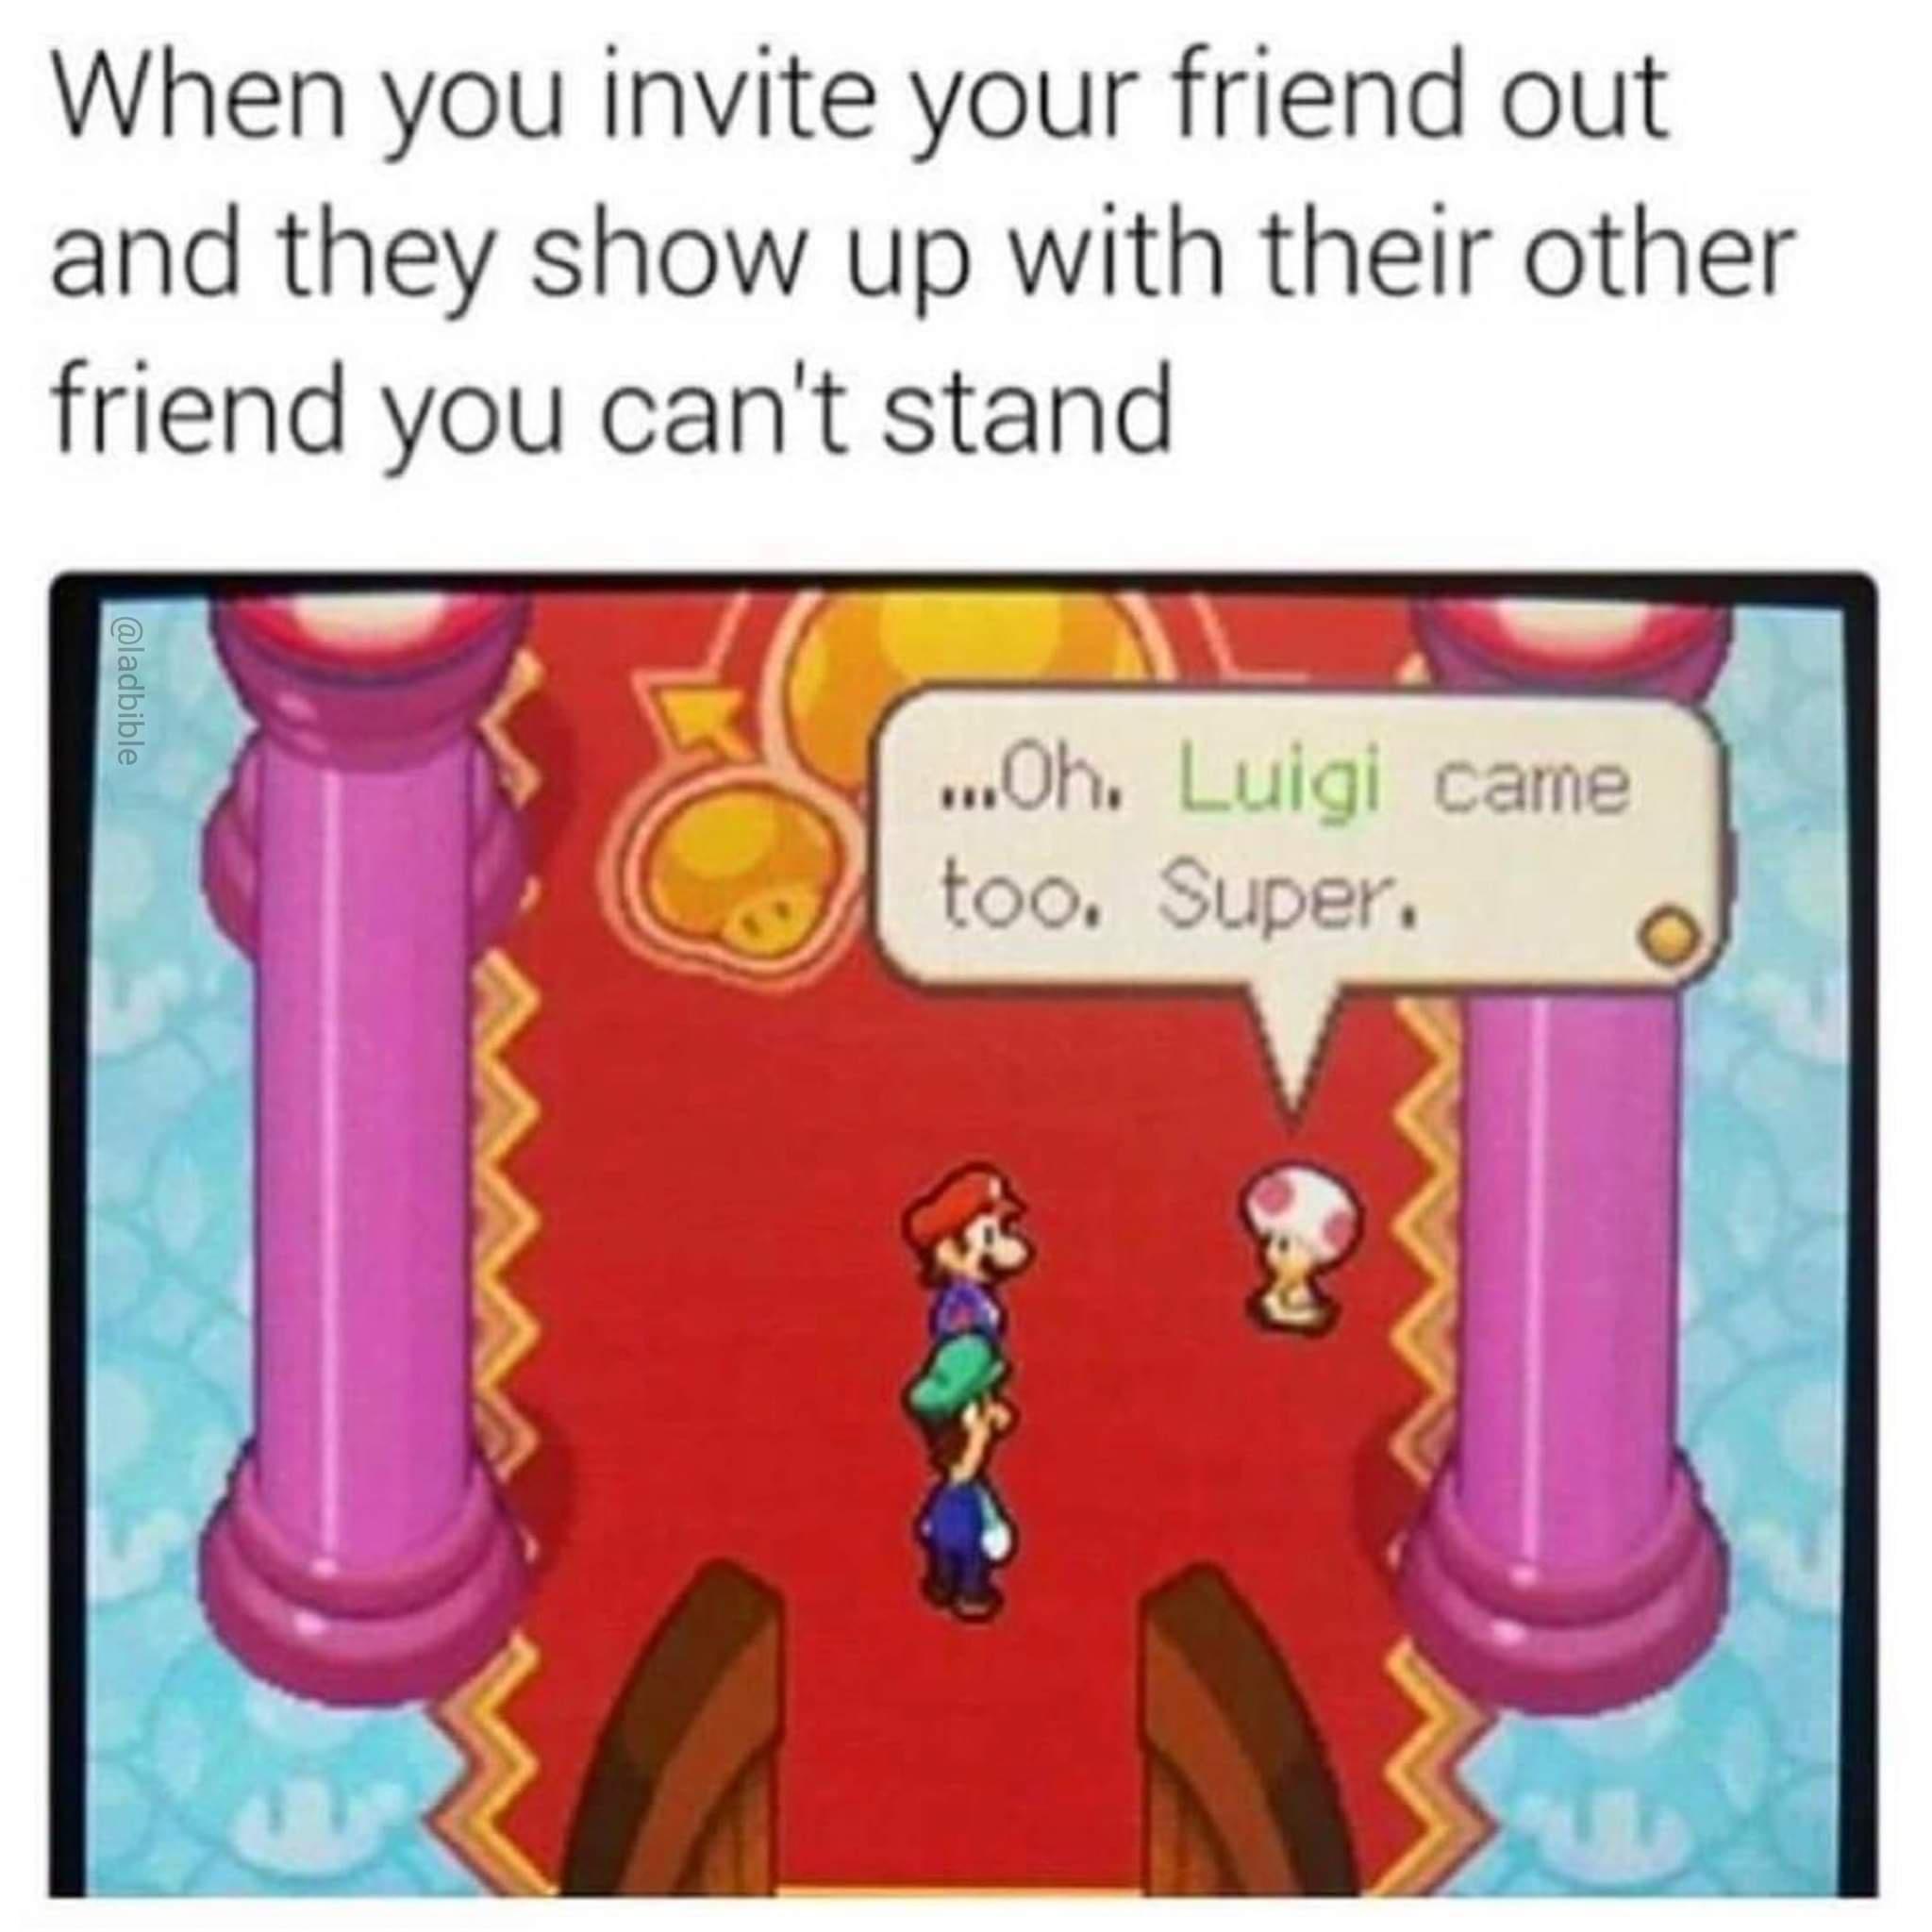 monday morning randomness - luigi meme oh super - When you invite your friend out and they show up with their other friend you can't stand ...Oh. Luigi came too. Super.